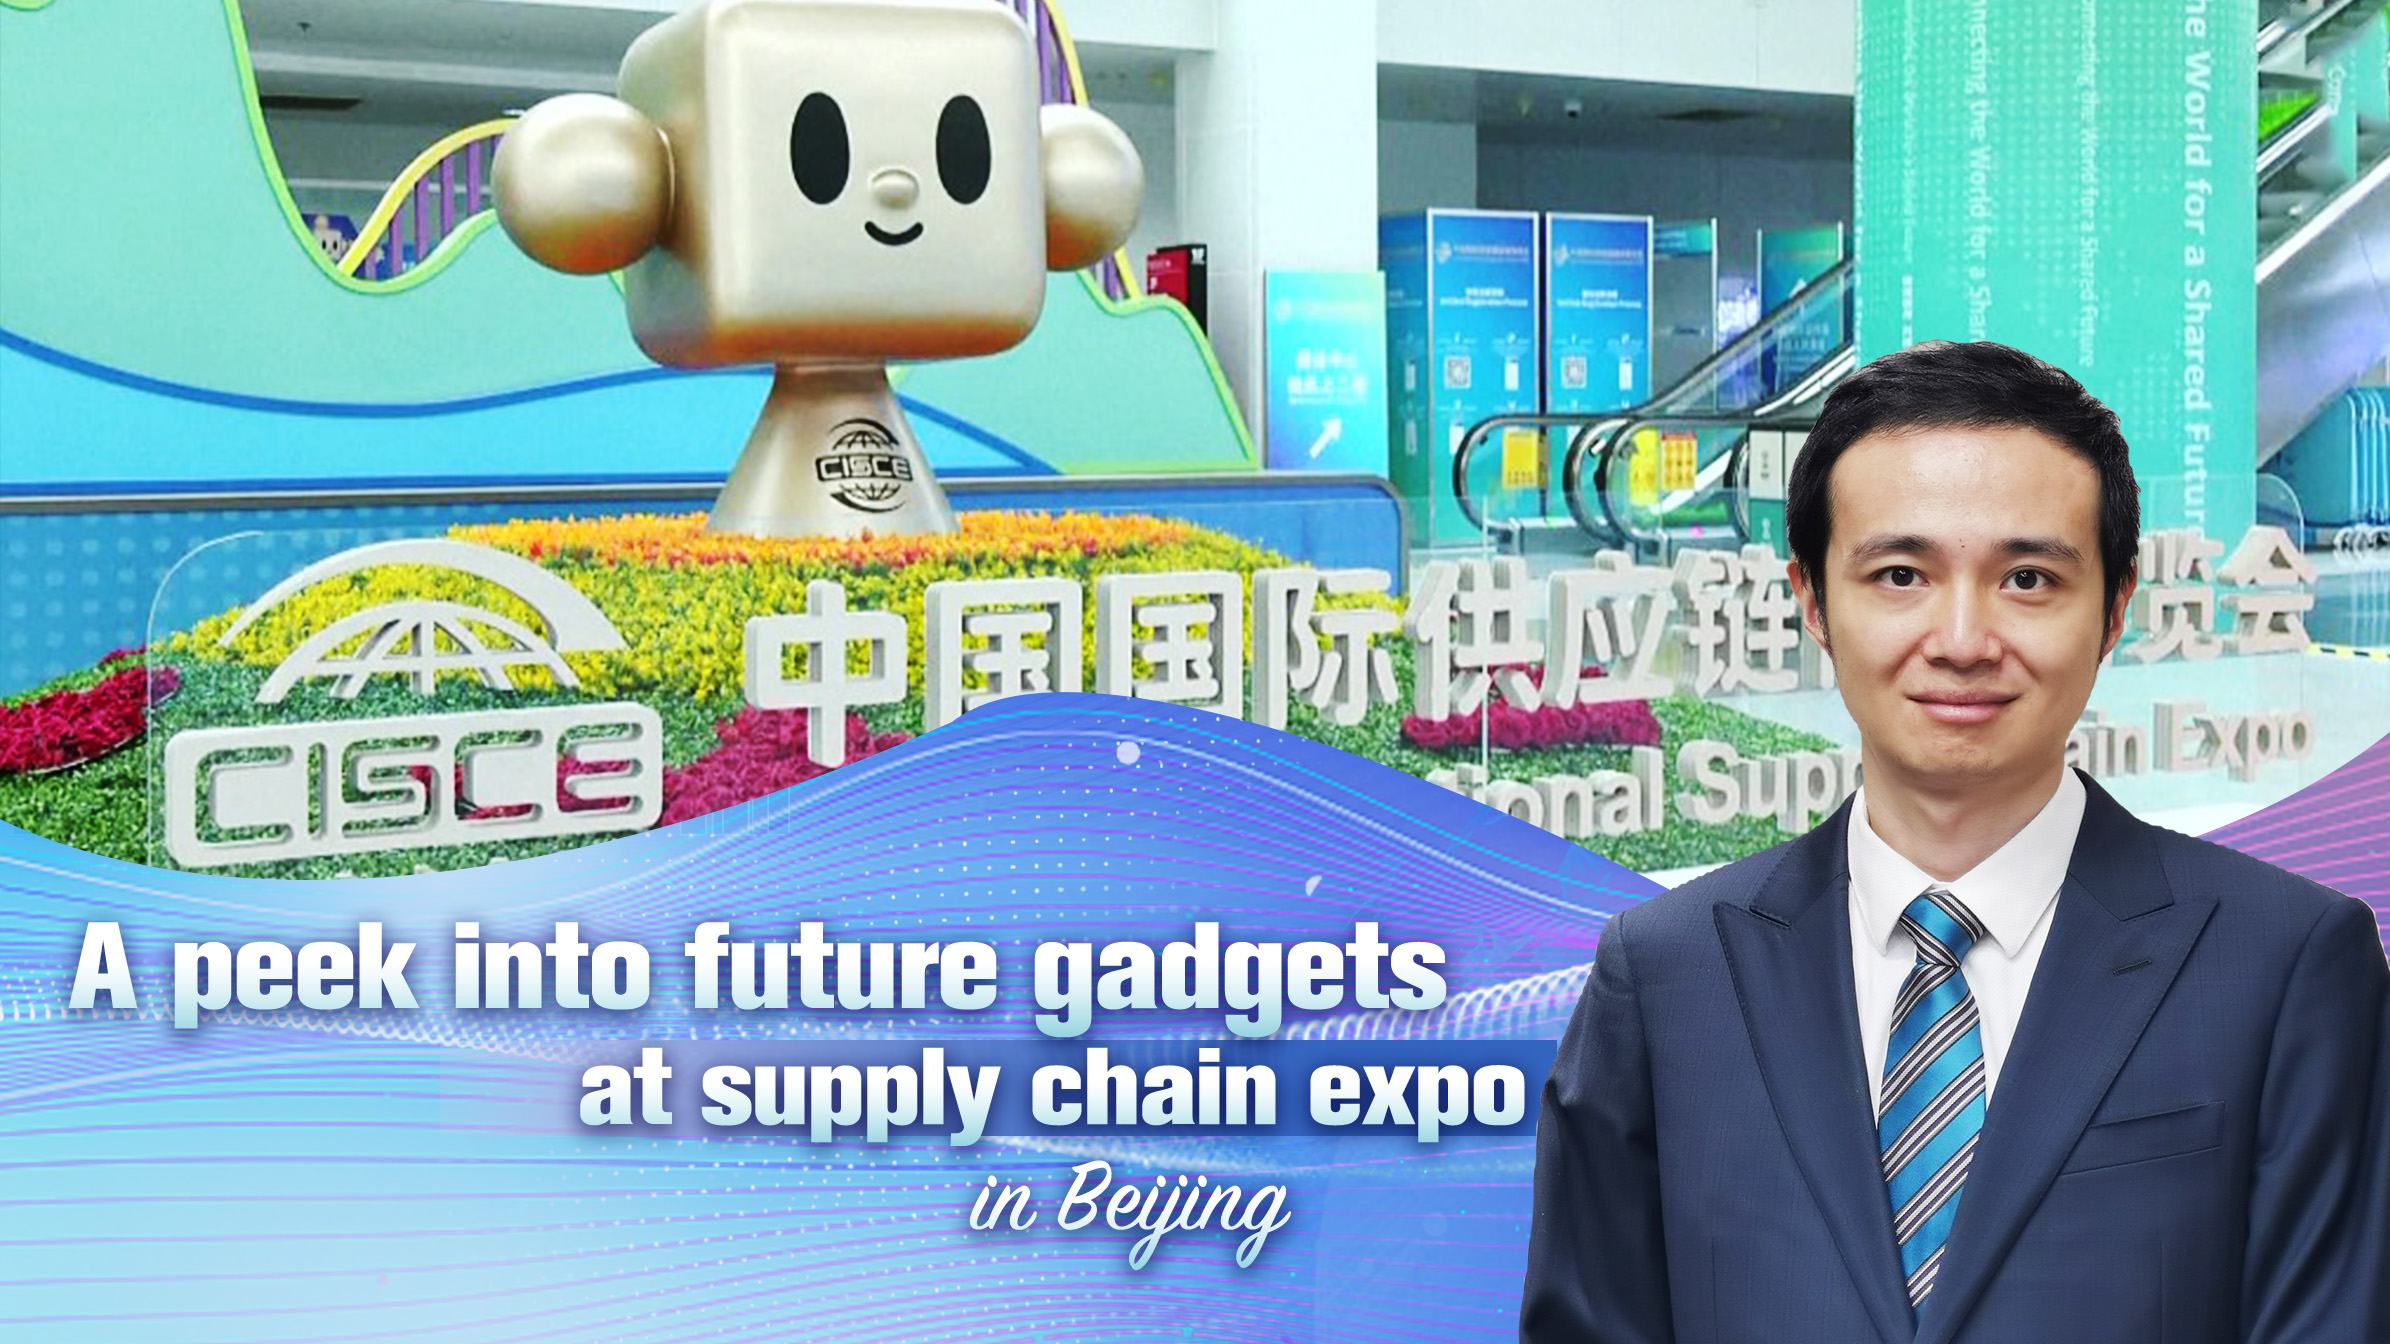 Live: A peek into future gadgets at supply chain expo in Beijing